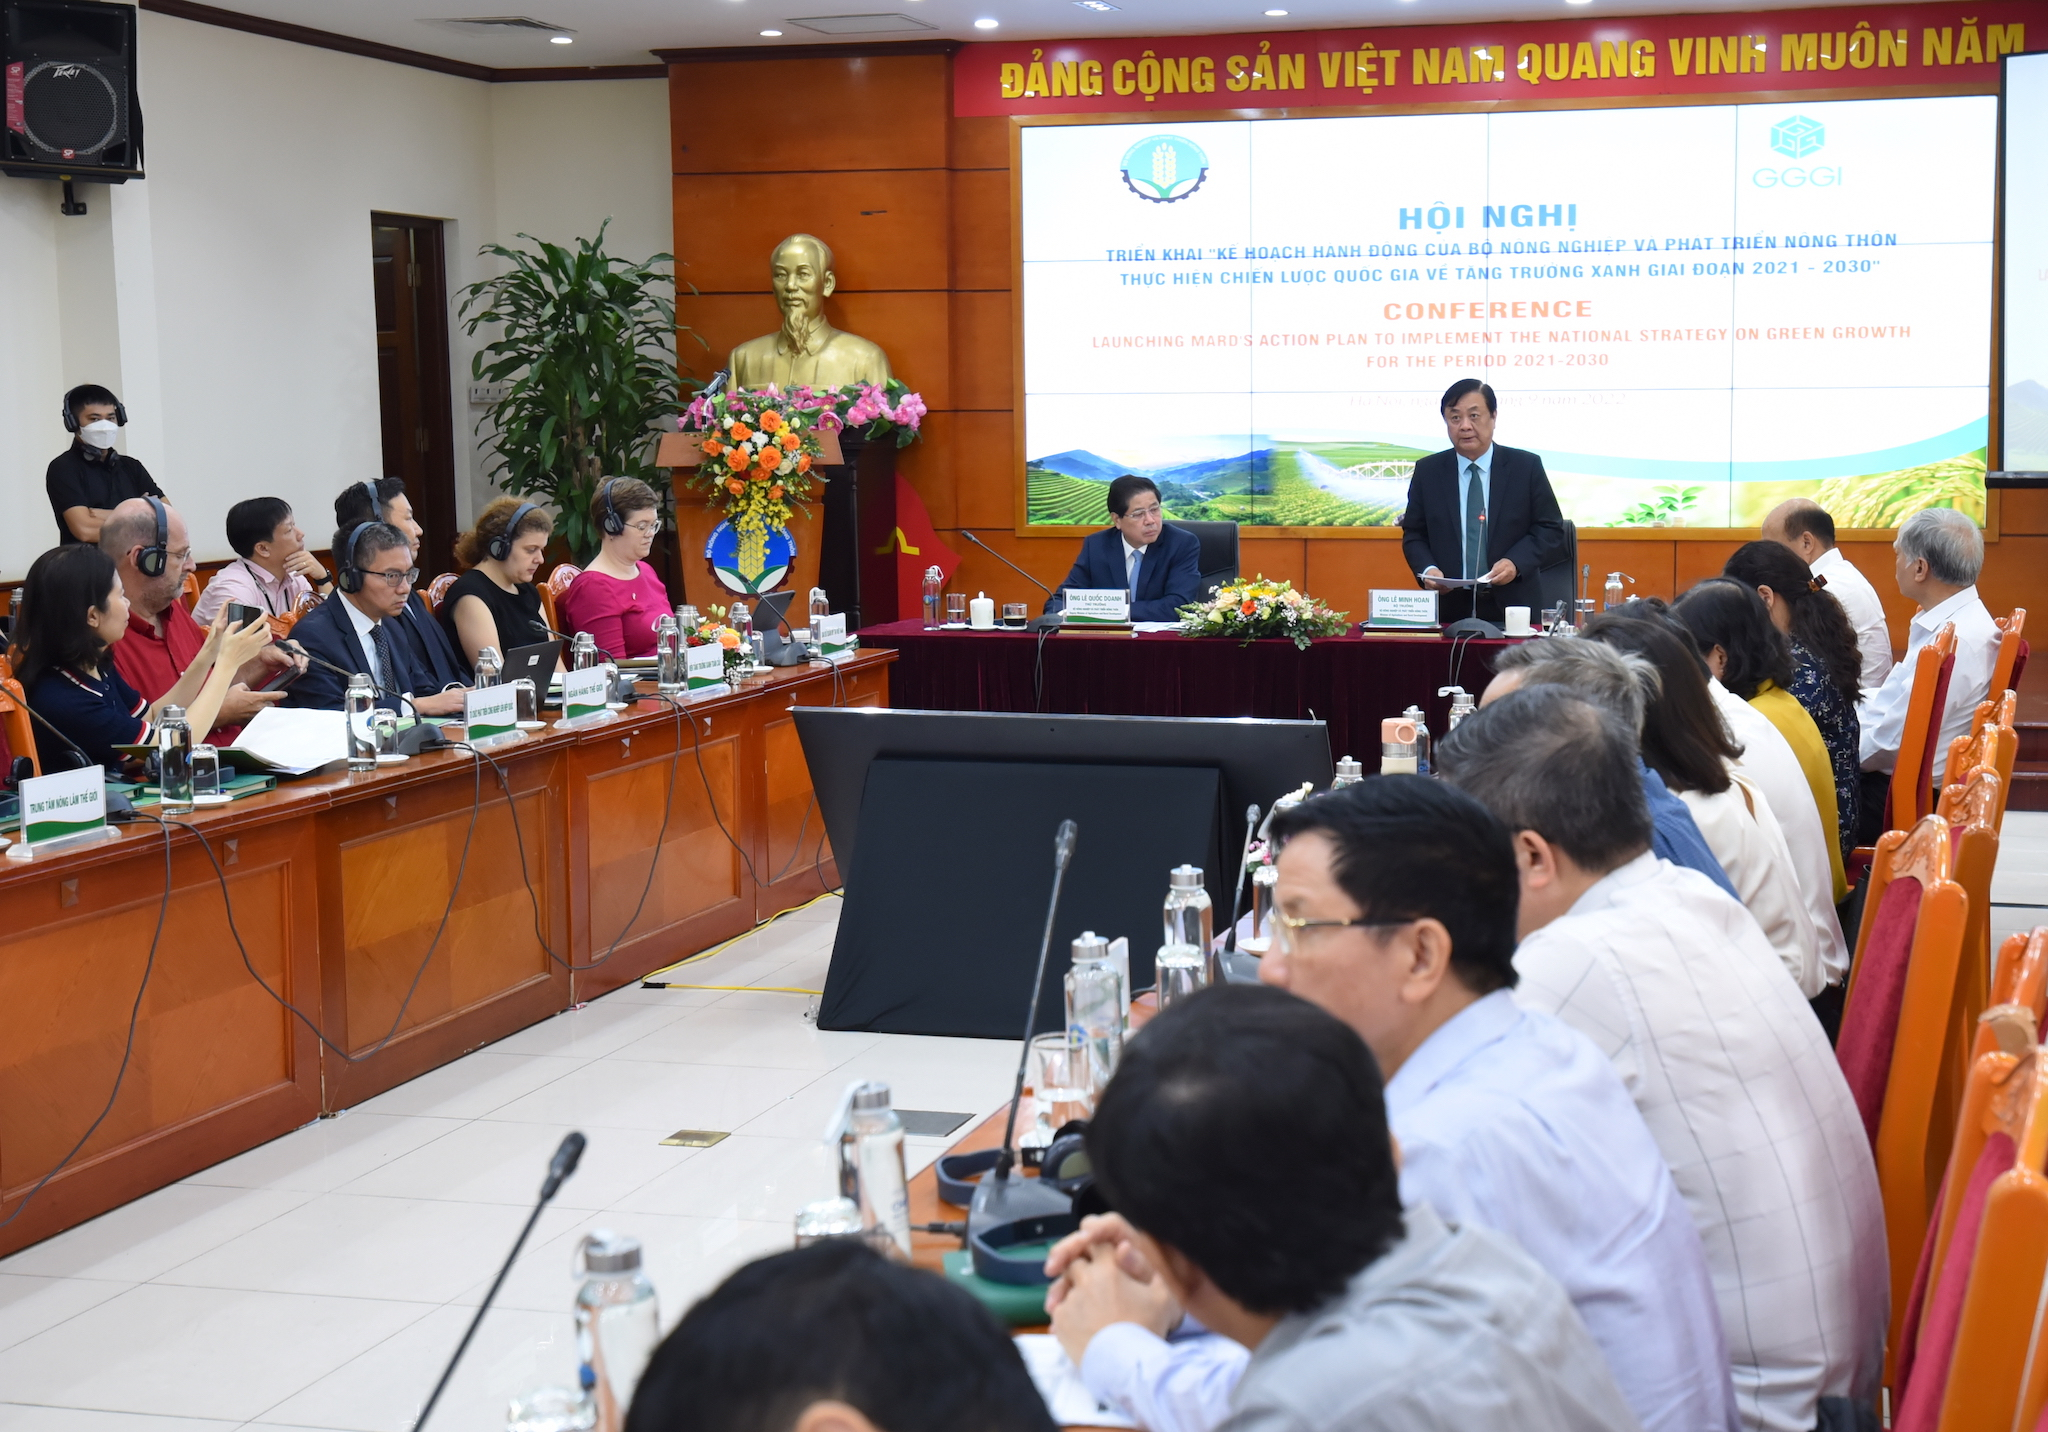 Minister Le Minh Hoan and Deputy Minister Le Quoc Doanh chaired a conference on the implementation of the Action Plan of the Ministry of Agriculture and Rural Development following the 2021-2030 National Strategy on Green Growth on September 30. Photo: Tung Dinh.